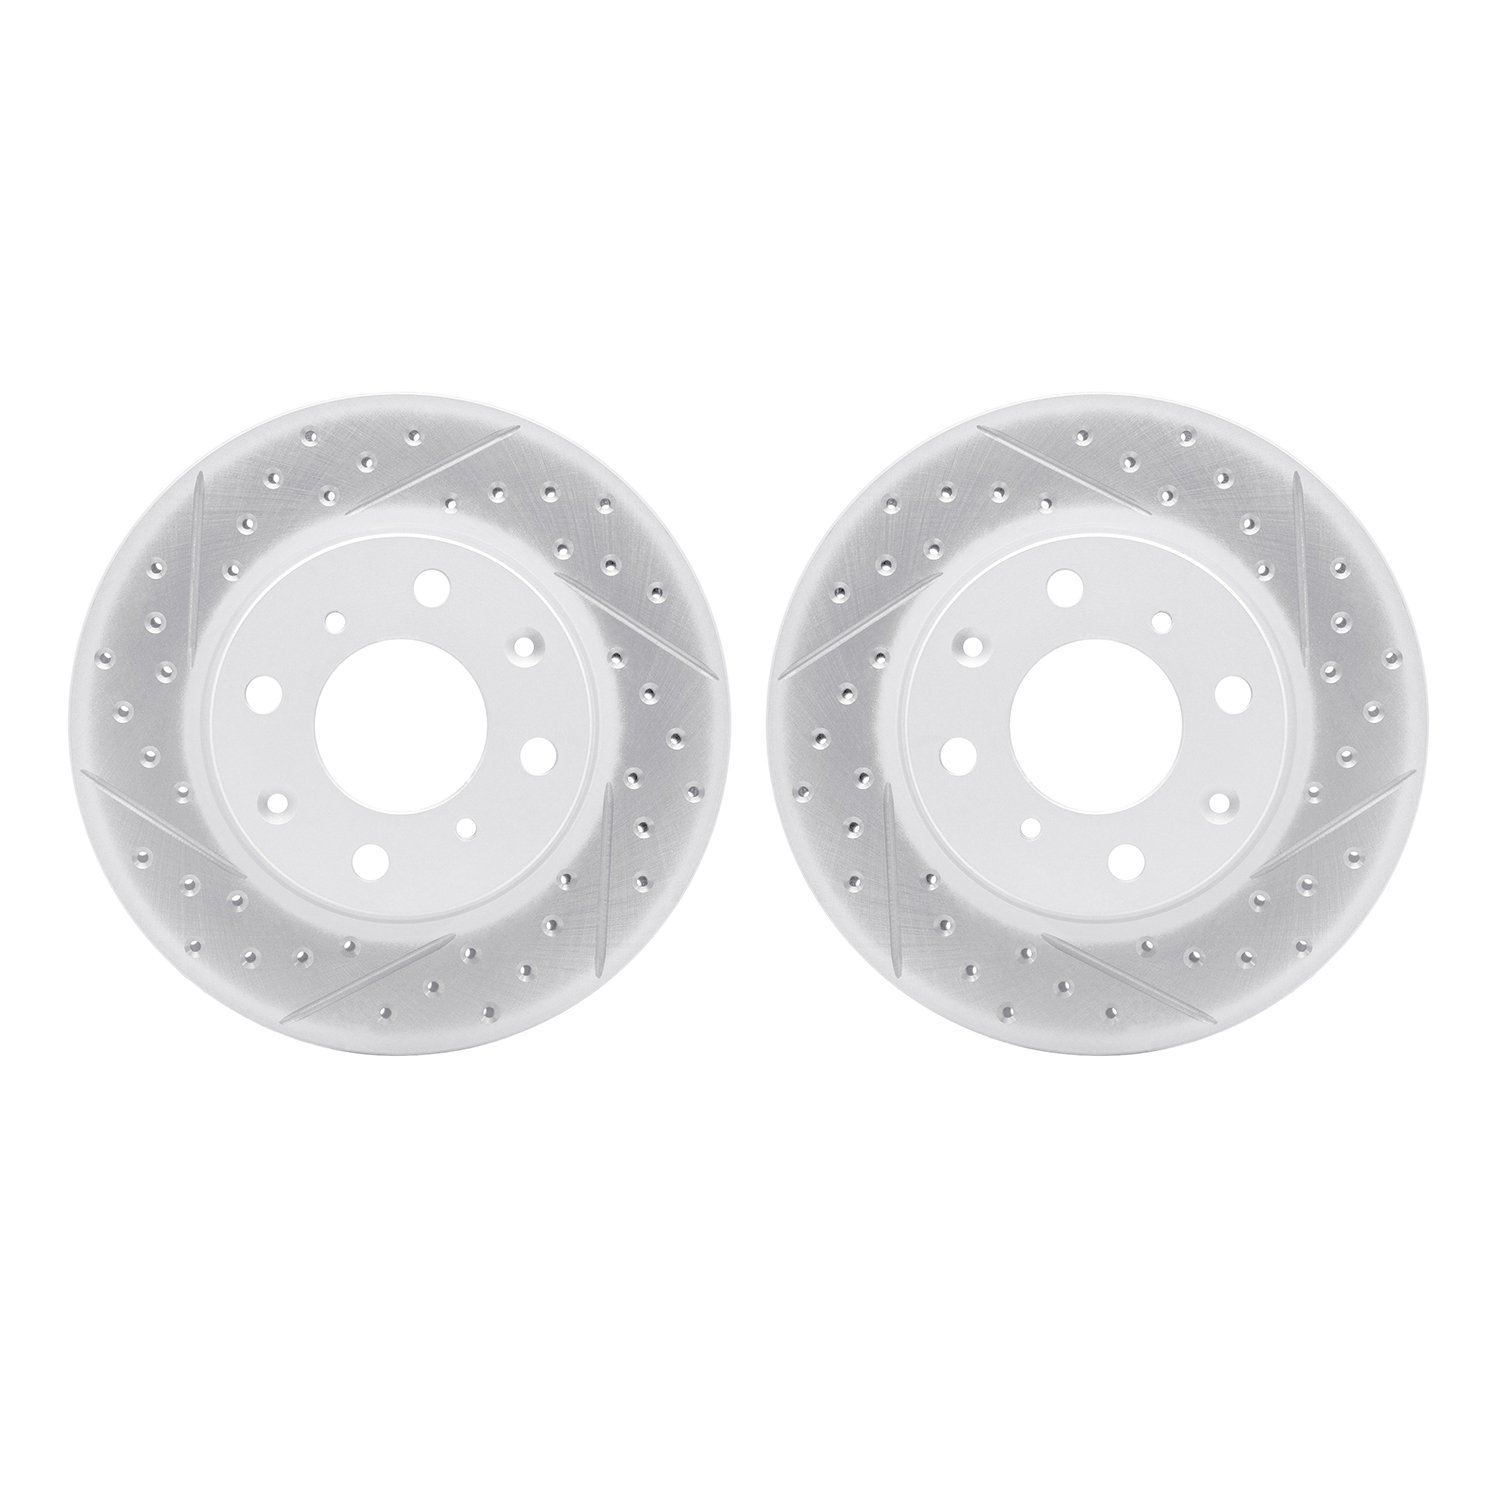 2002-59021 Geoperformance Drilled/Slotted Brake Rotors, 1990-2000 Acura/Honda, Position: Front